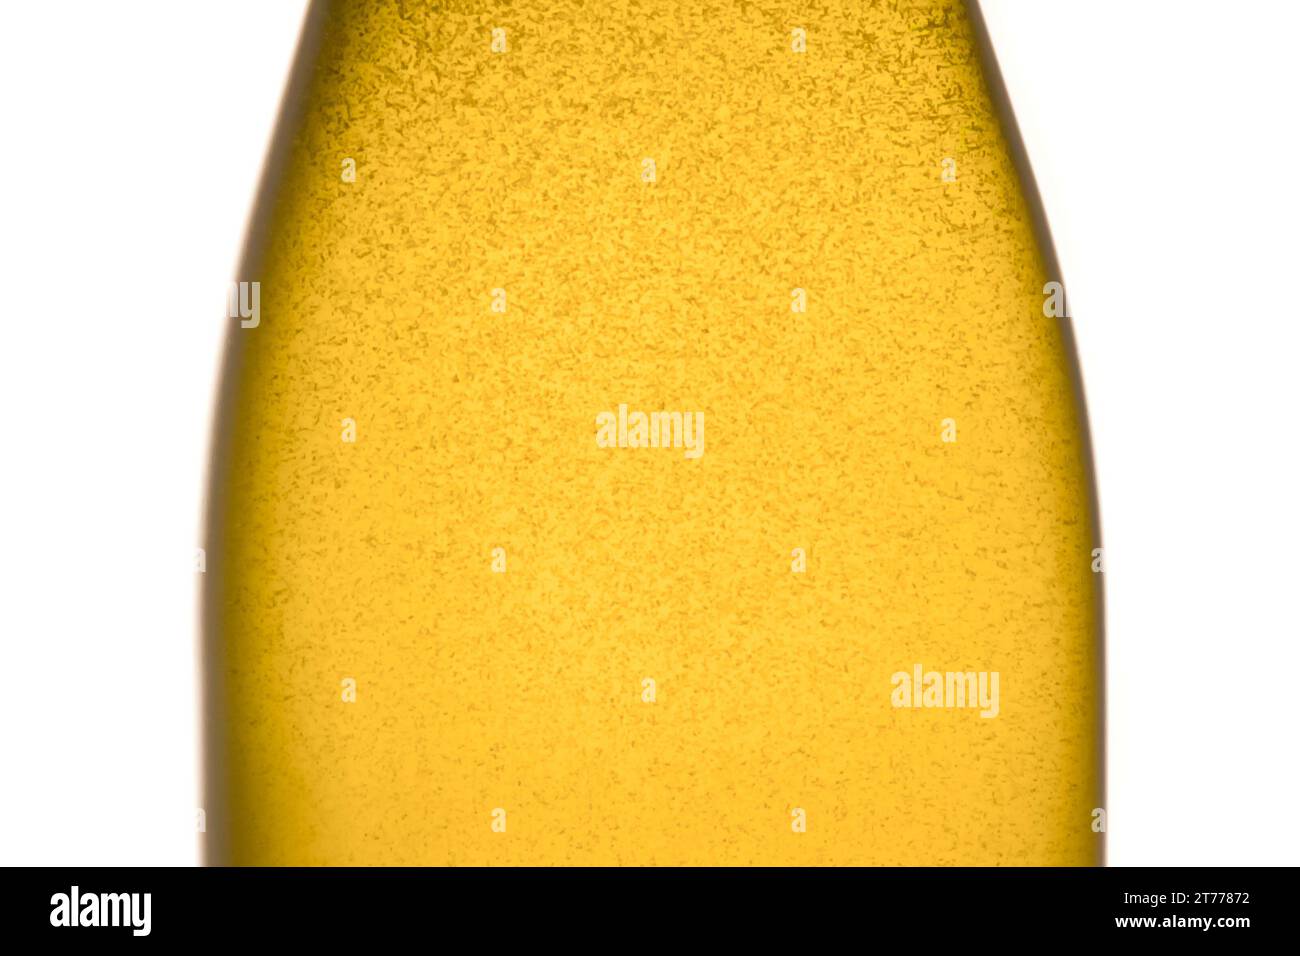 detail of champagne bottle with golden bubbles on white background Stock Photo